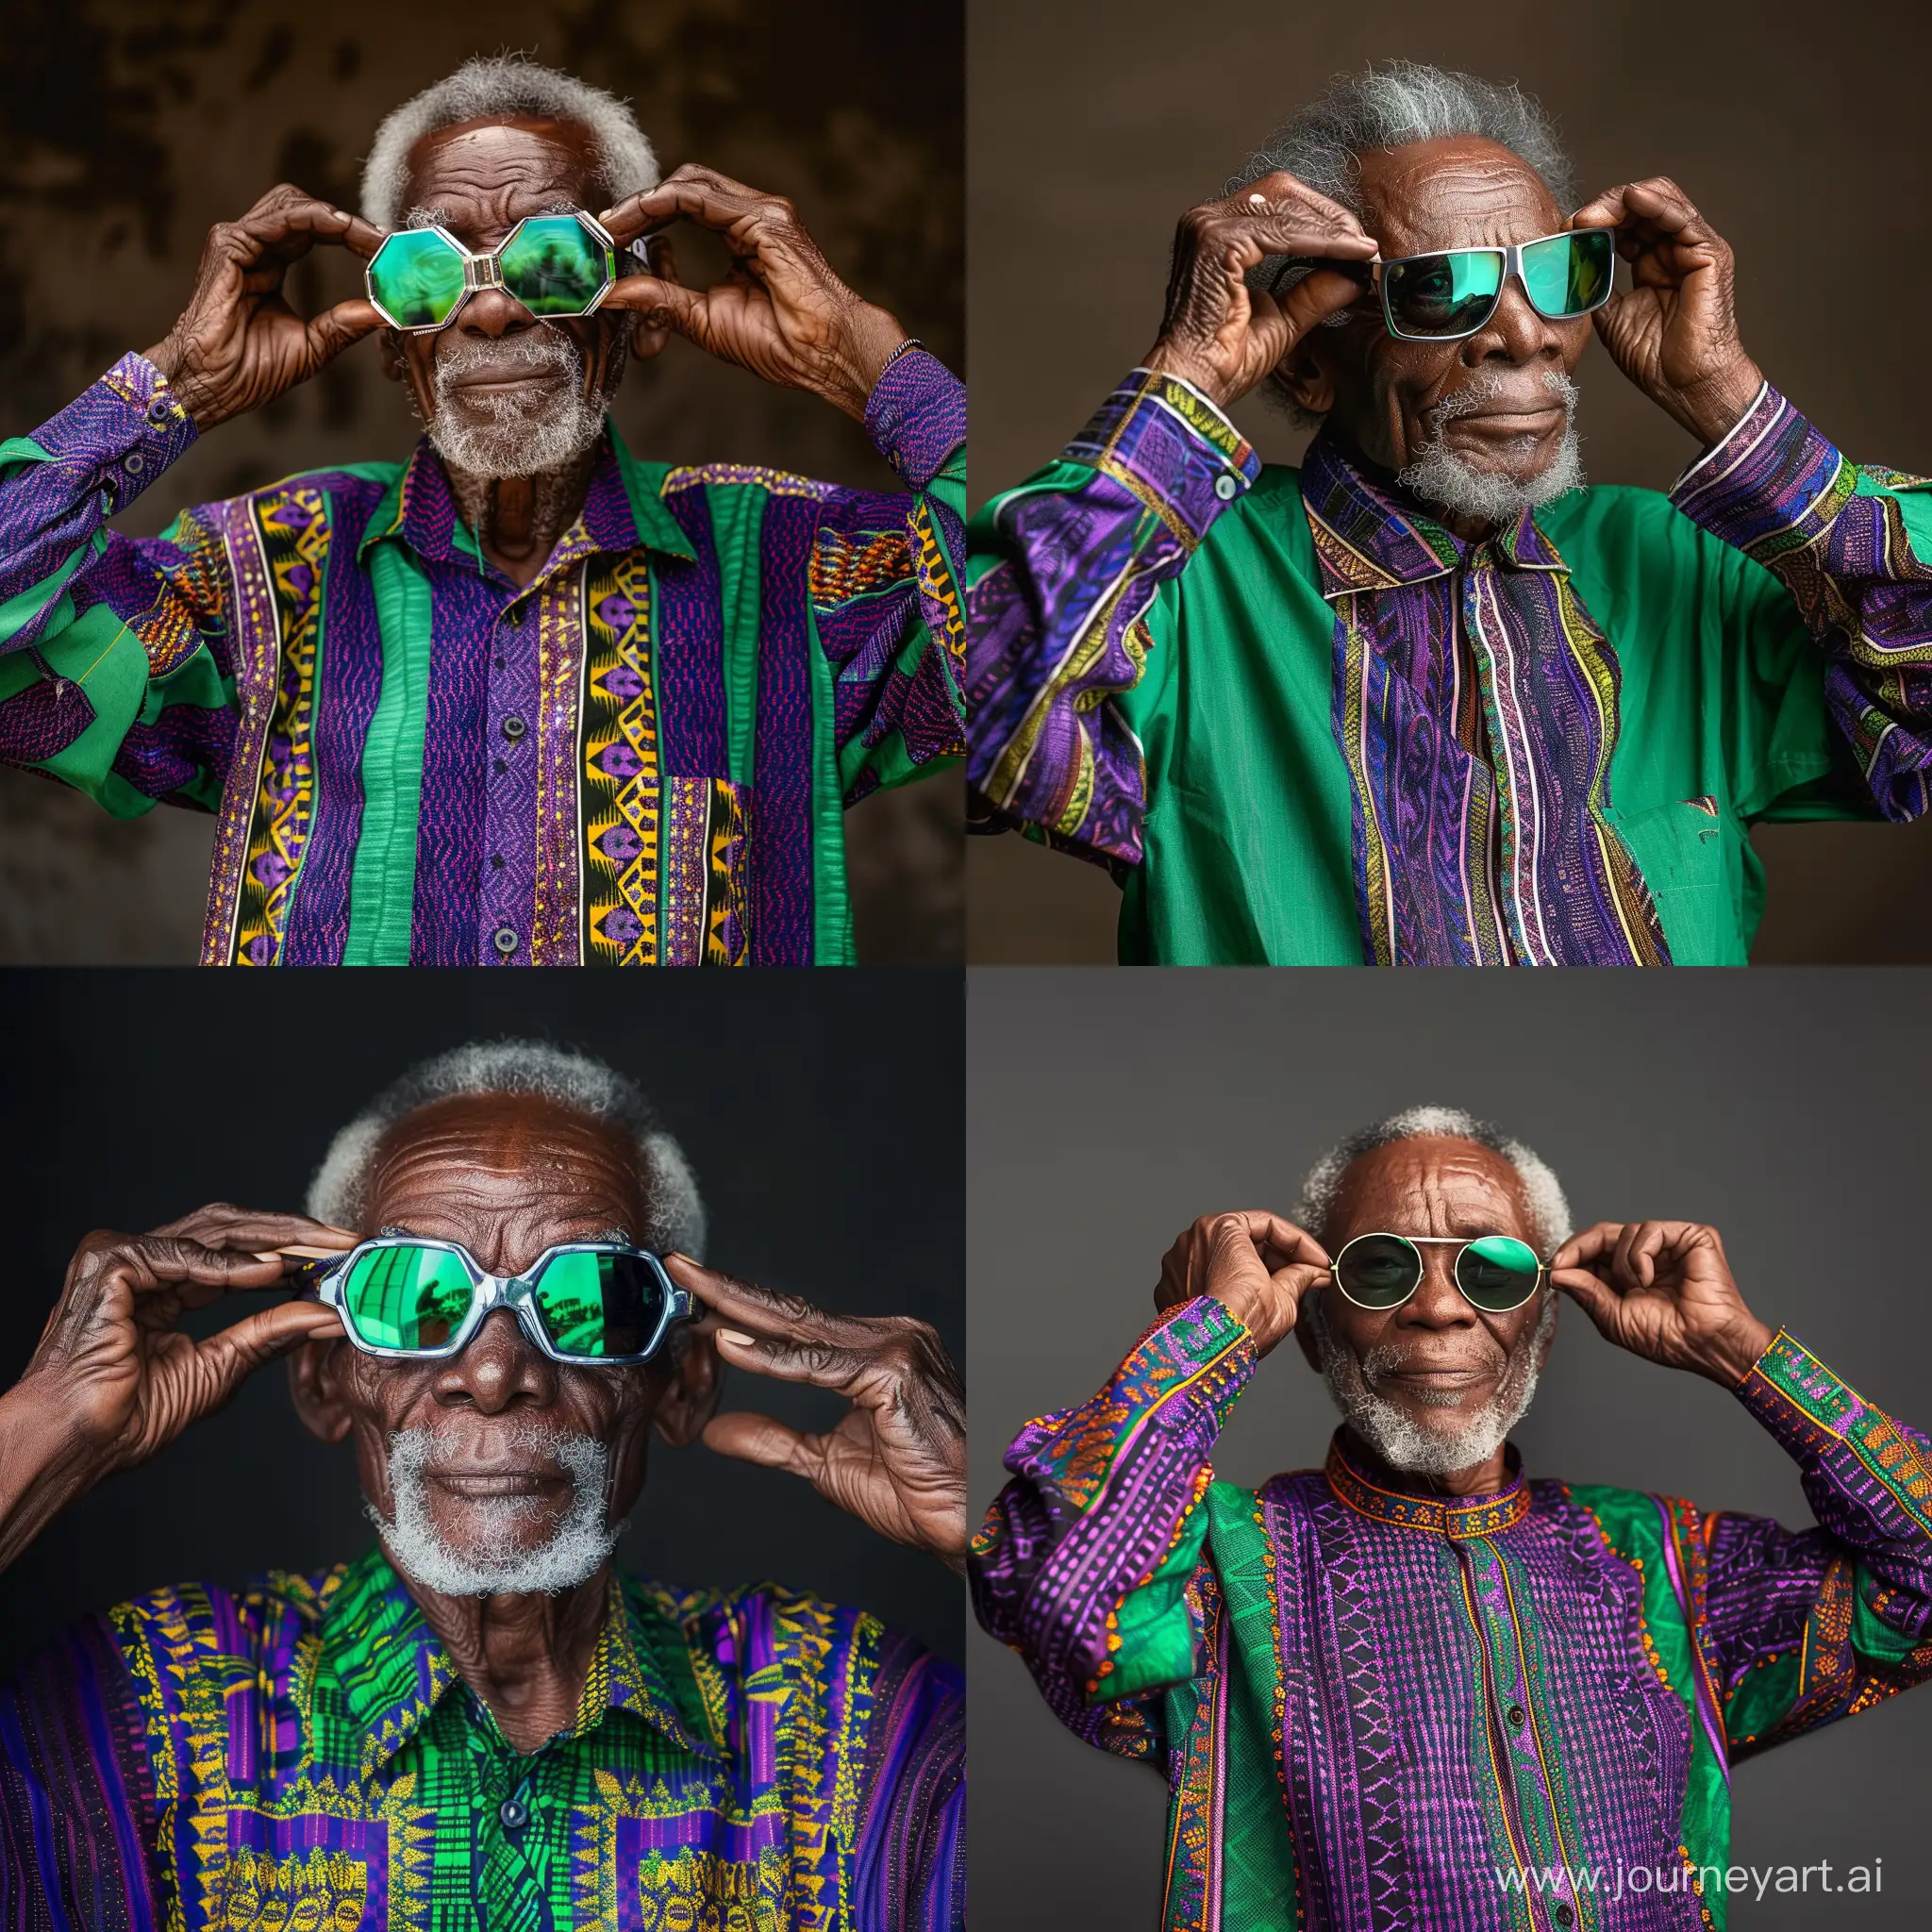 Old man adjusting his clea r reflective glasses. He’s wearing and emerald and purple Ankara shirt